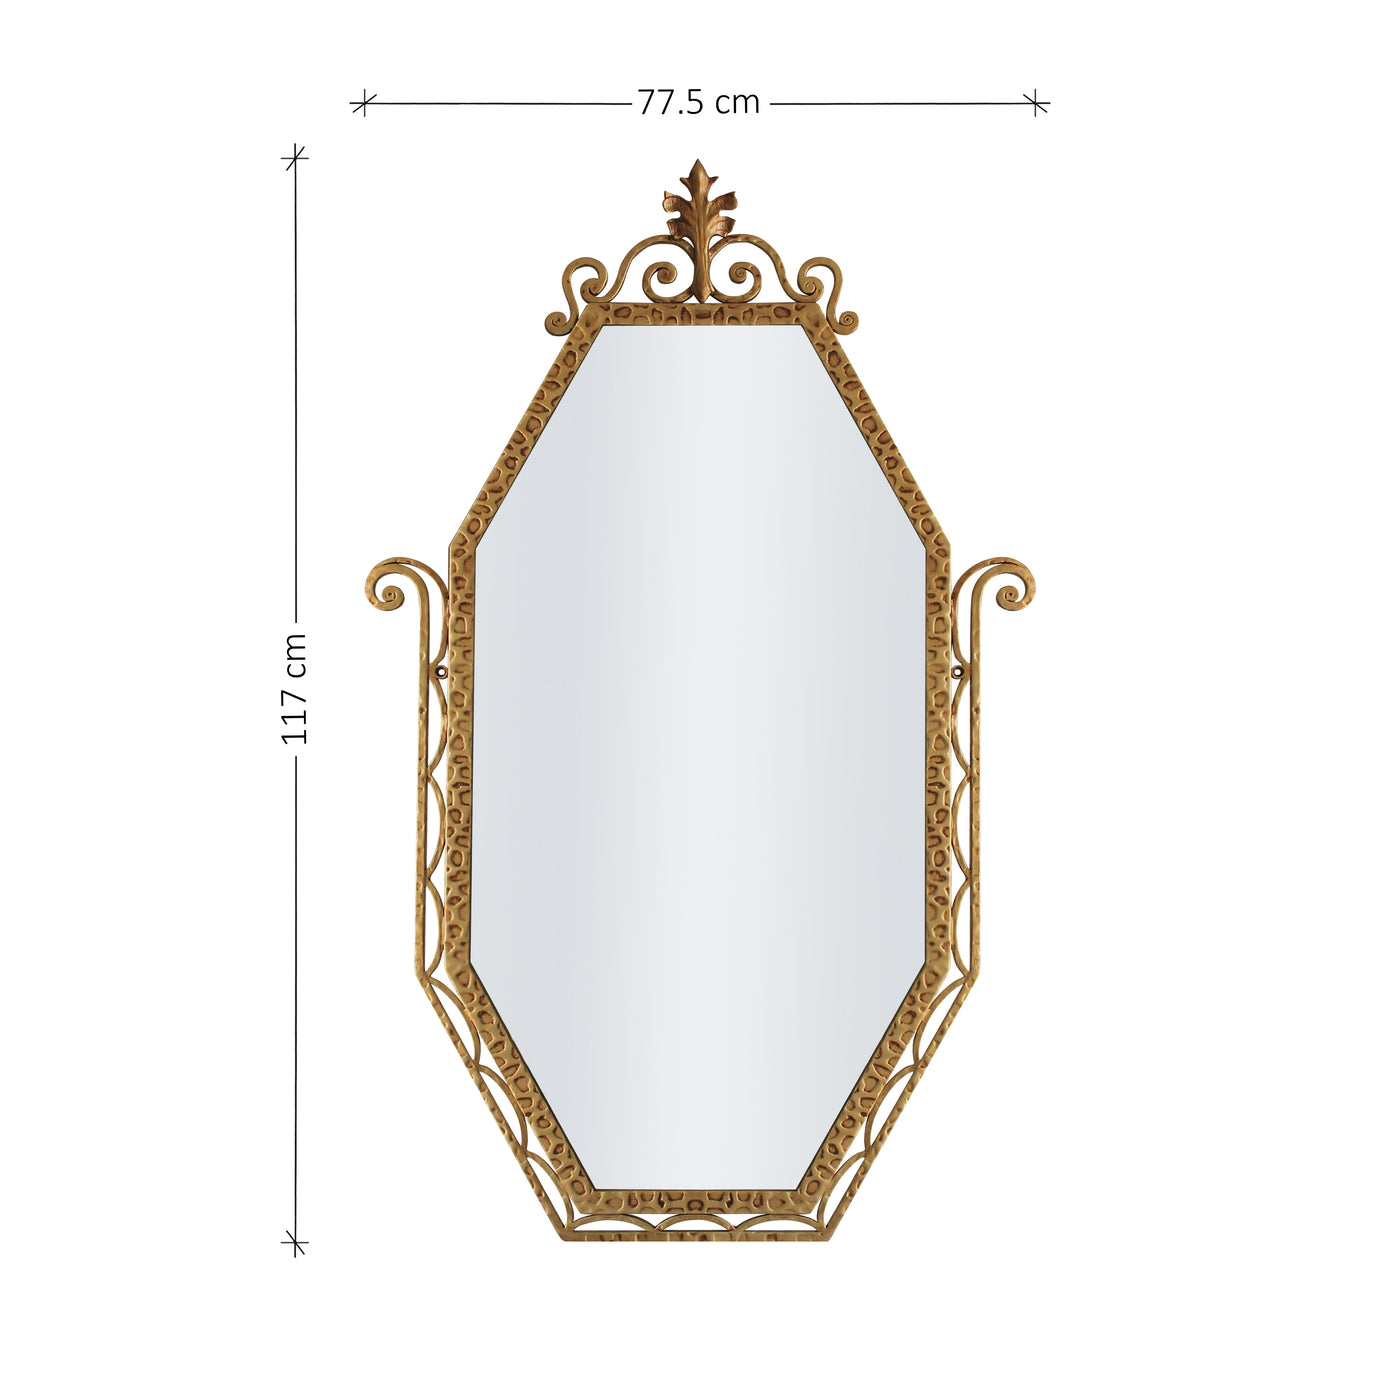 An Art Deco styled wrought iron mirror painted in an antique golden finish; with annotated dimensions